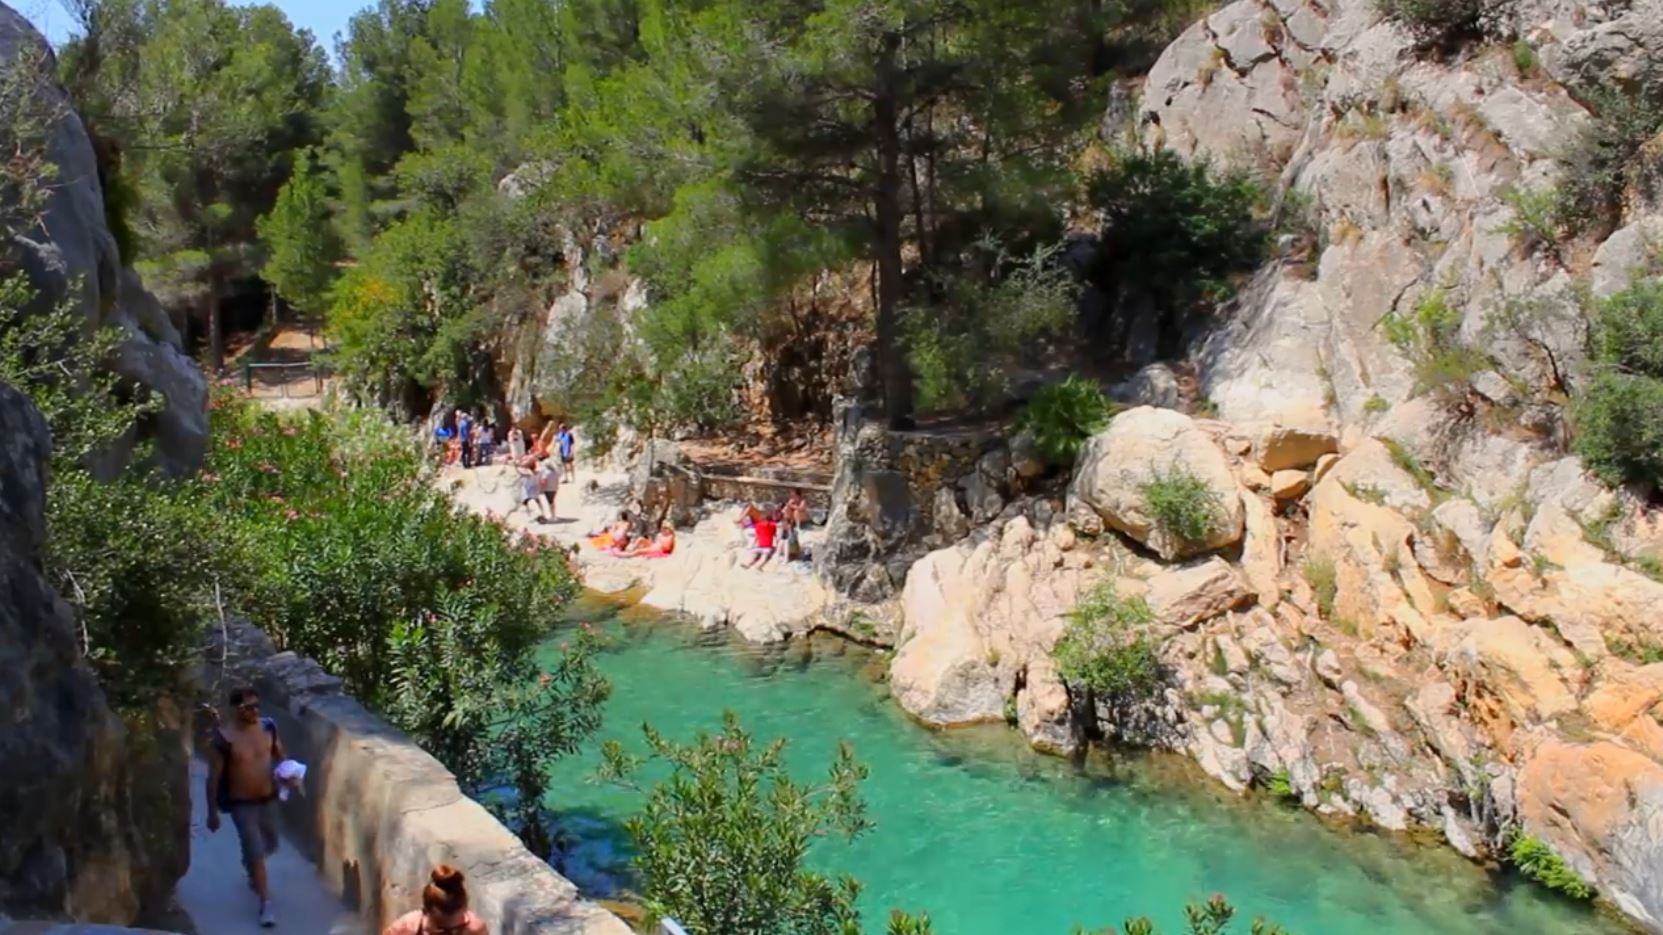 Guadalest and Algar Falls, Round Town Travel